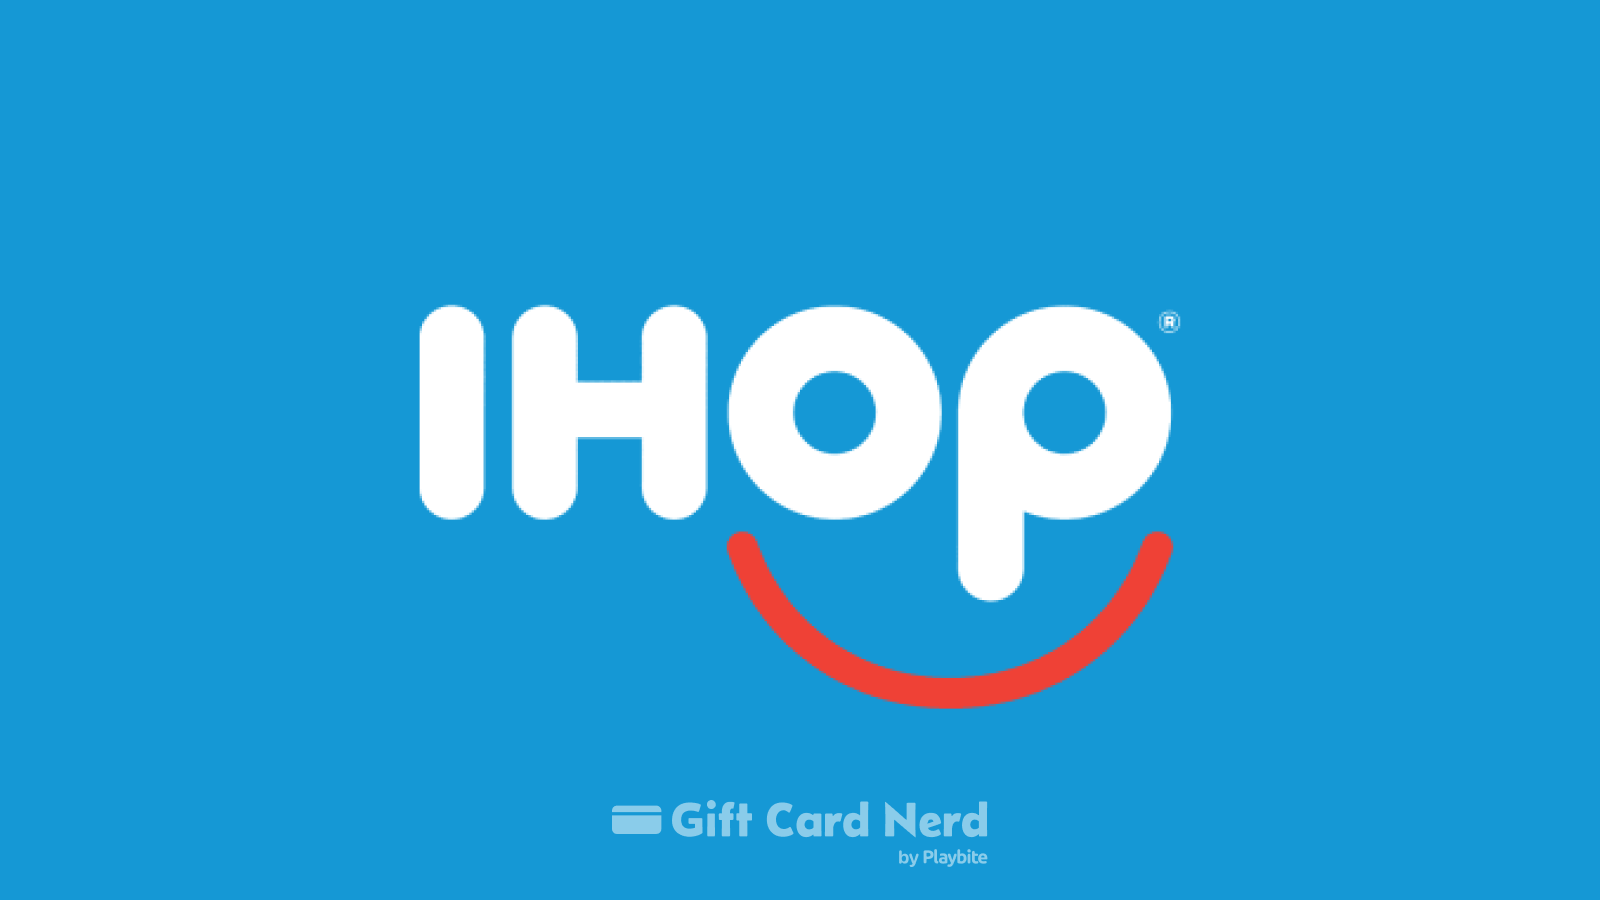 How to Check IHOP Gift Card Balance